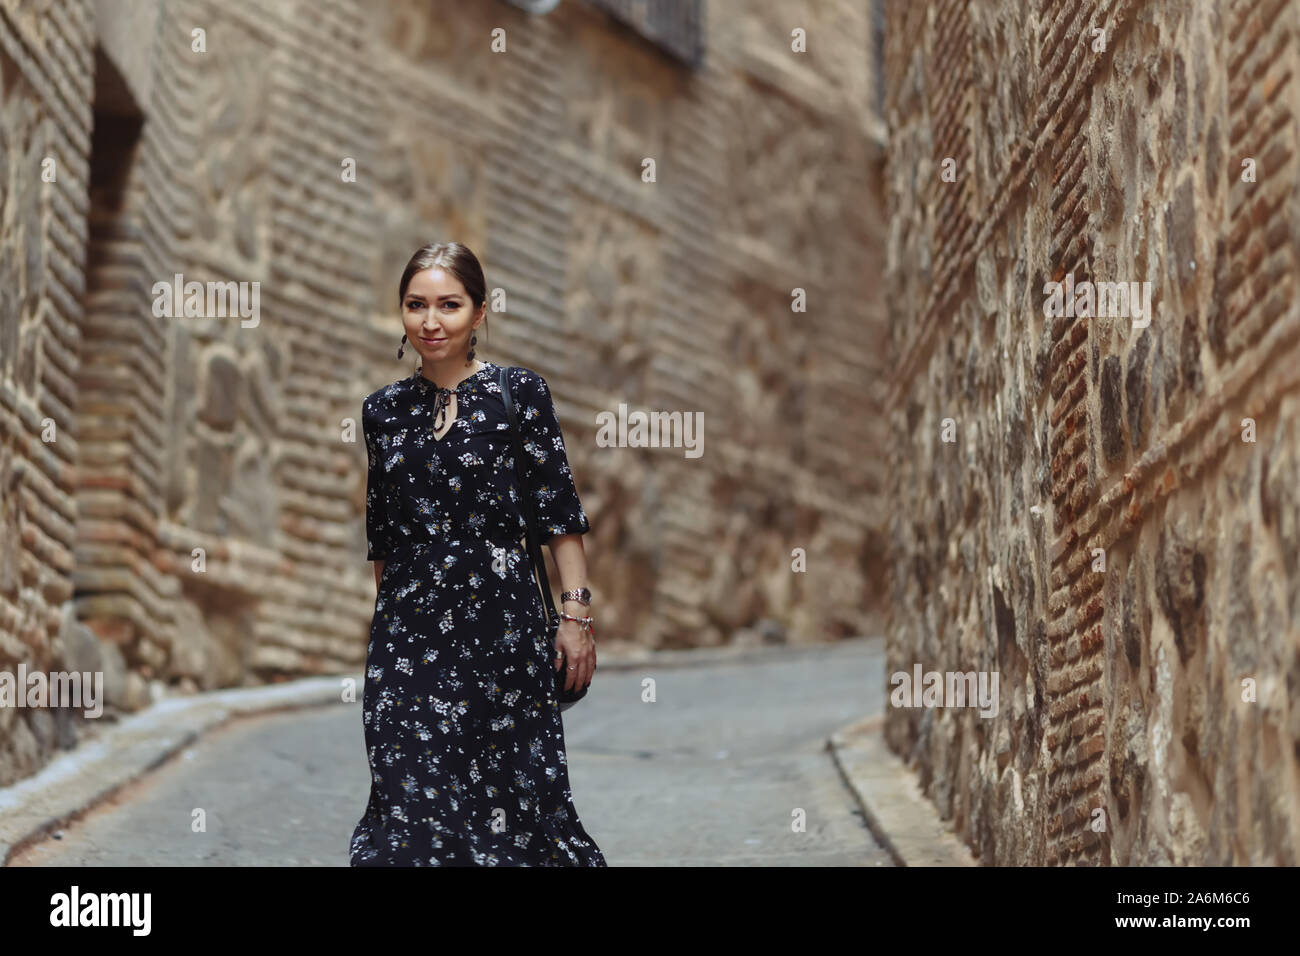 Fashion portrait of young beautiful girl posing on the old town street. Ancient stone streets with women tourist in Toledo, Spain. Stock Photo